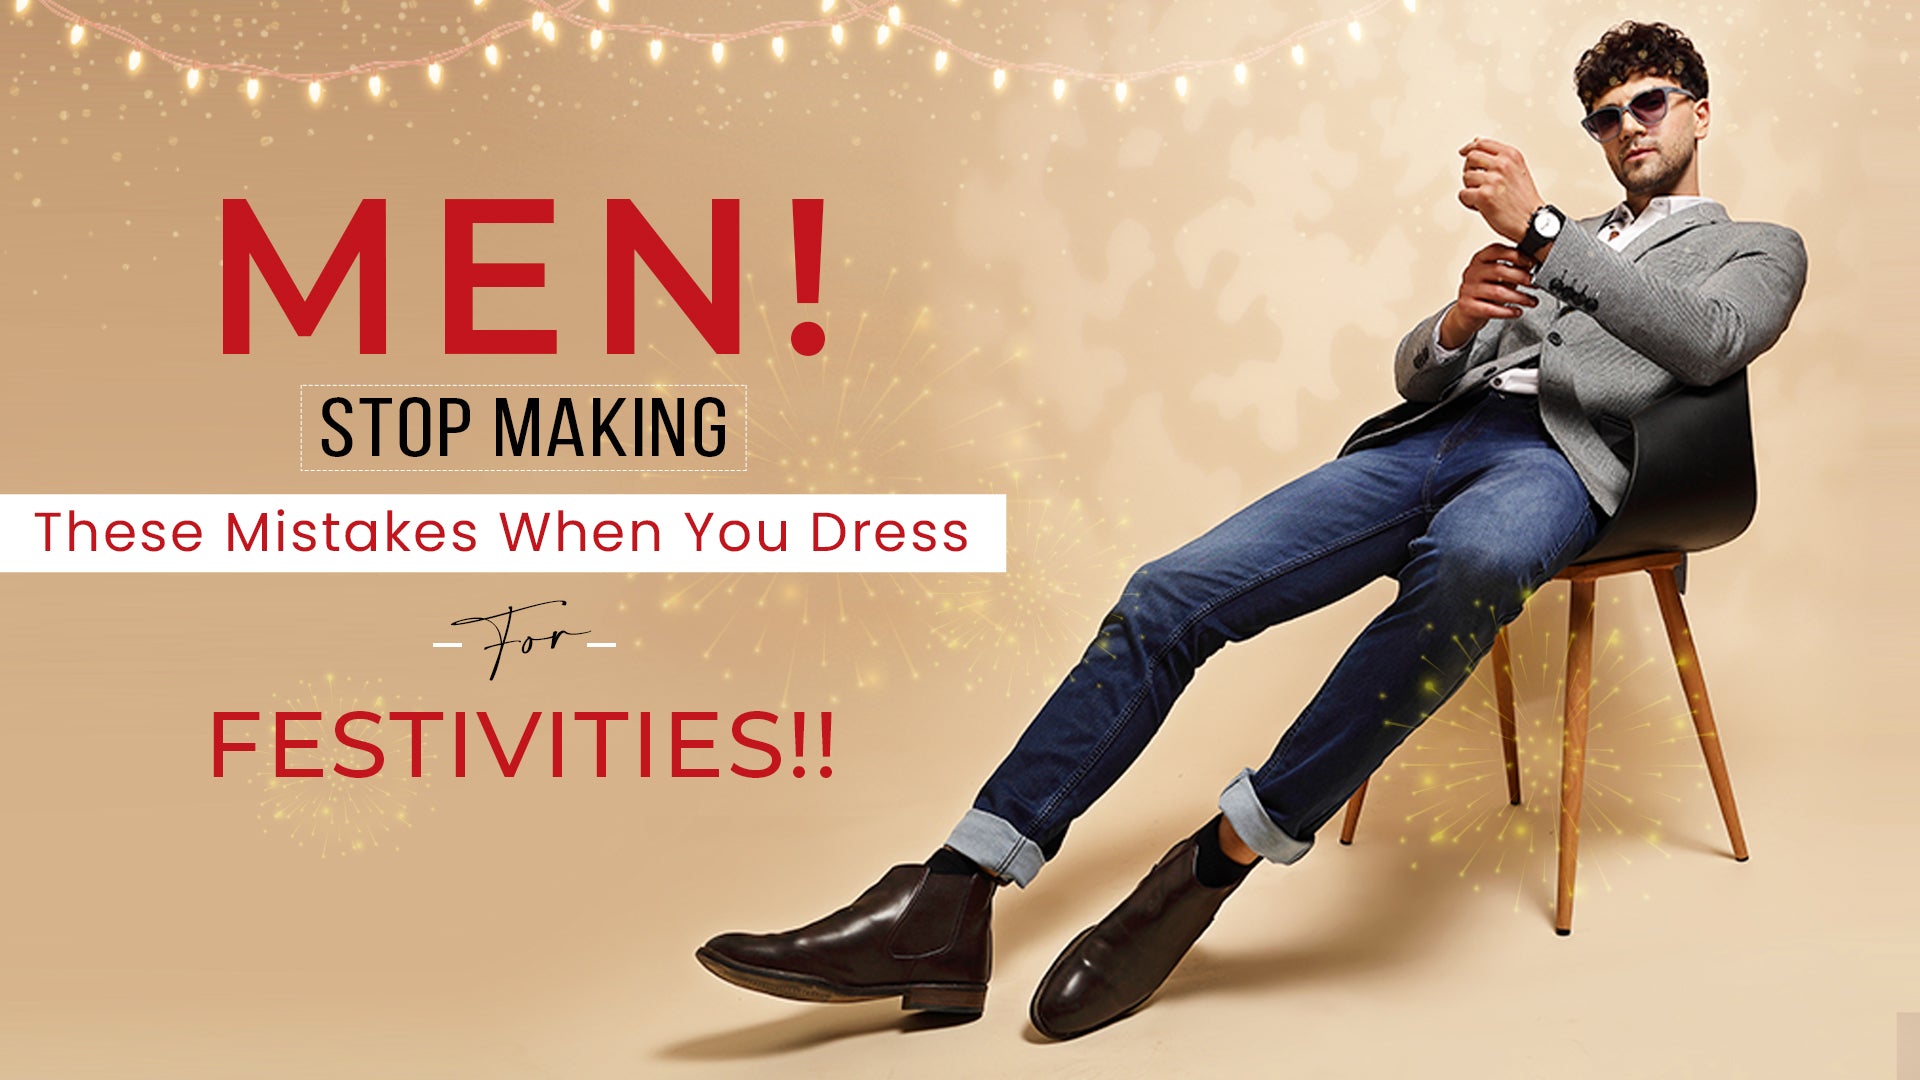 Men! Stop making these Mistakes when you dress for Festivities!!